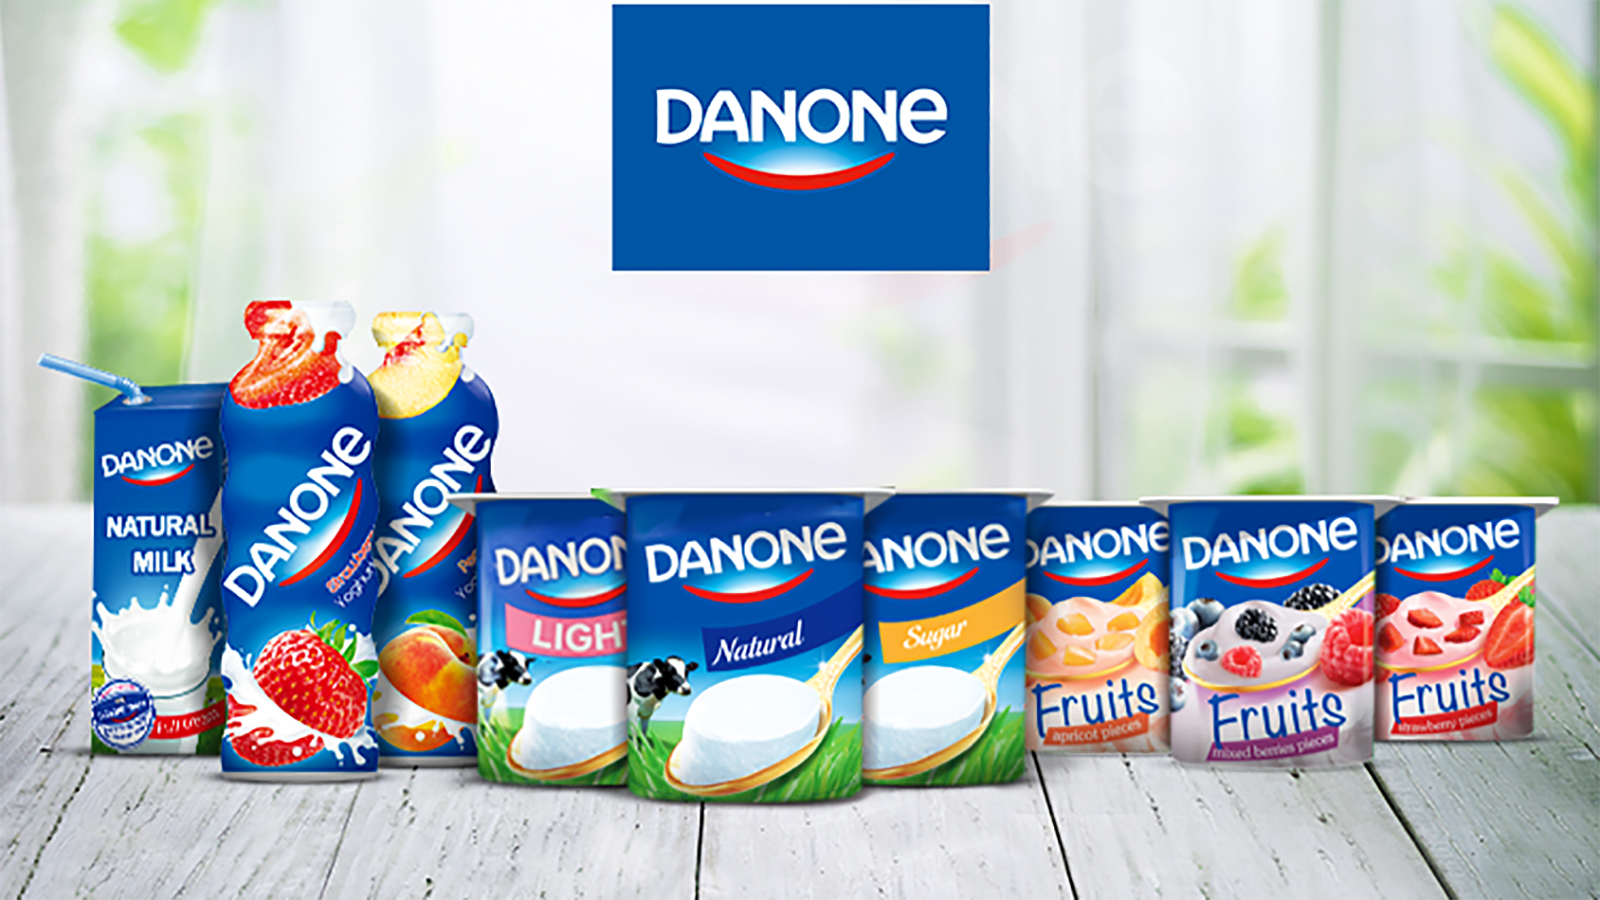 Danone will never launch HFSS products in UK, Ireland to honor its new health commitments